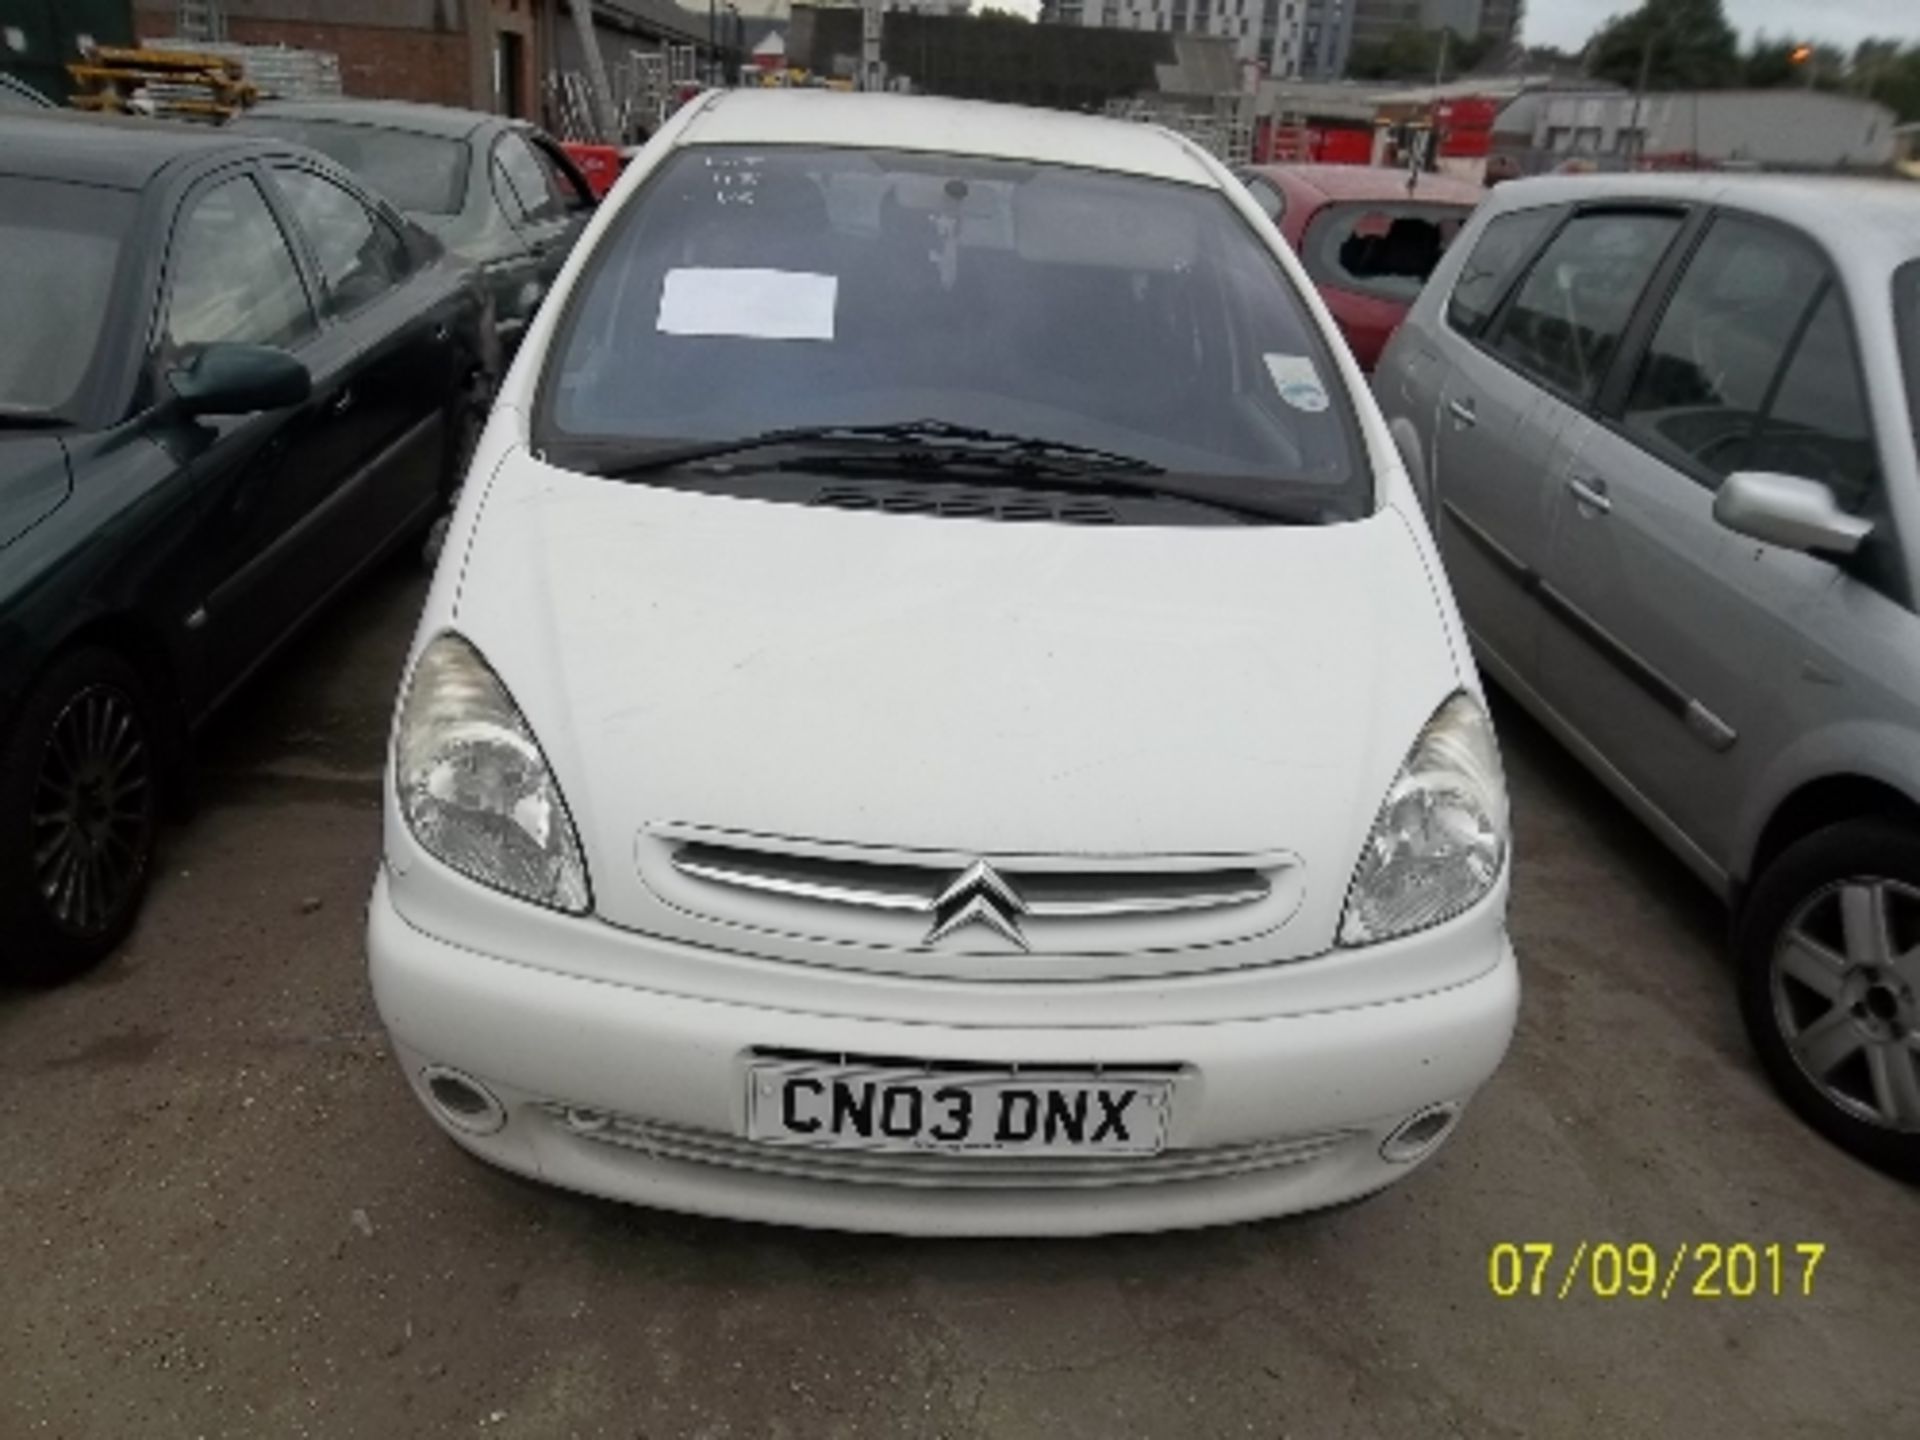 Citroen Saloon - CN03 DNX Date of registration: 01.03.2003 1587cc, petrol, white Odometer reading at